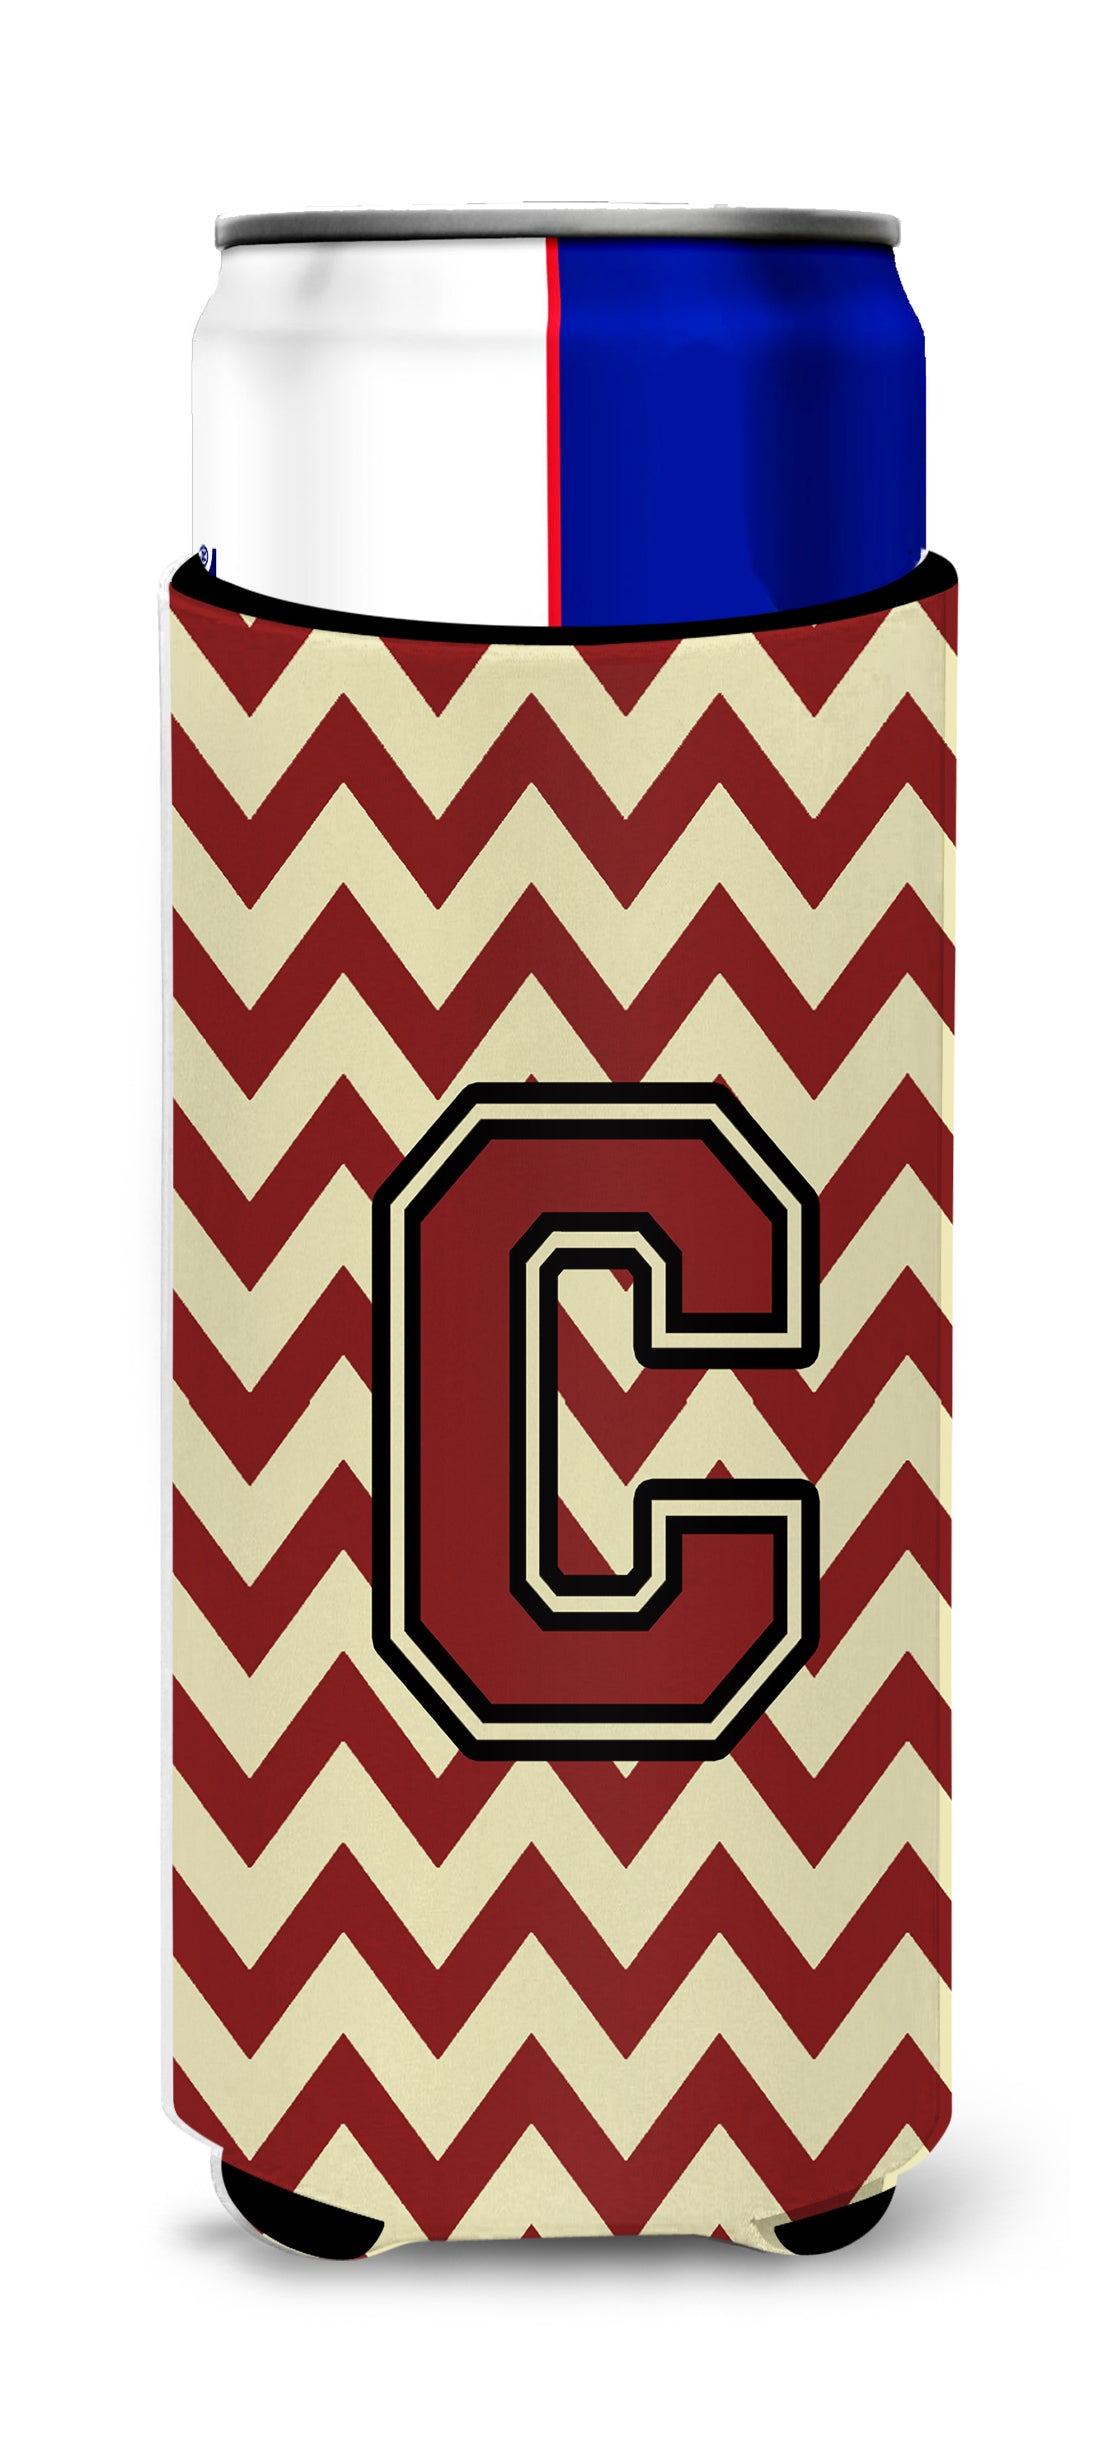 Letter C Chevron Maroon and Gold Ultra Beverage Insulators for slim cans CJ1061-CMUK